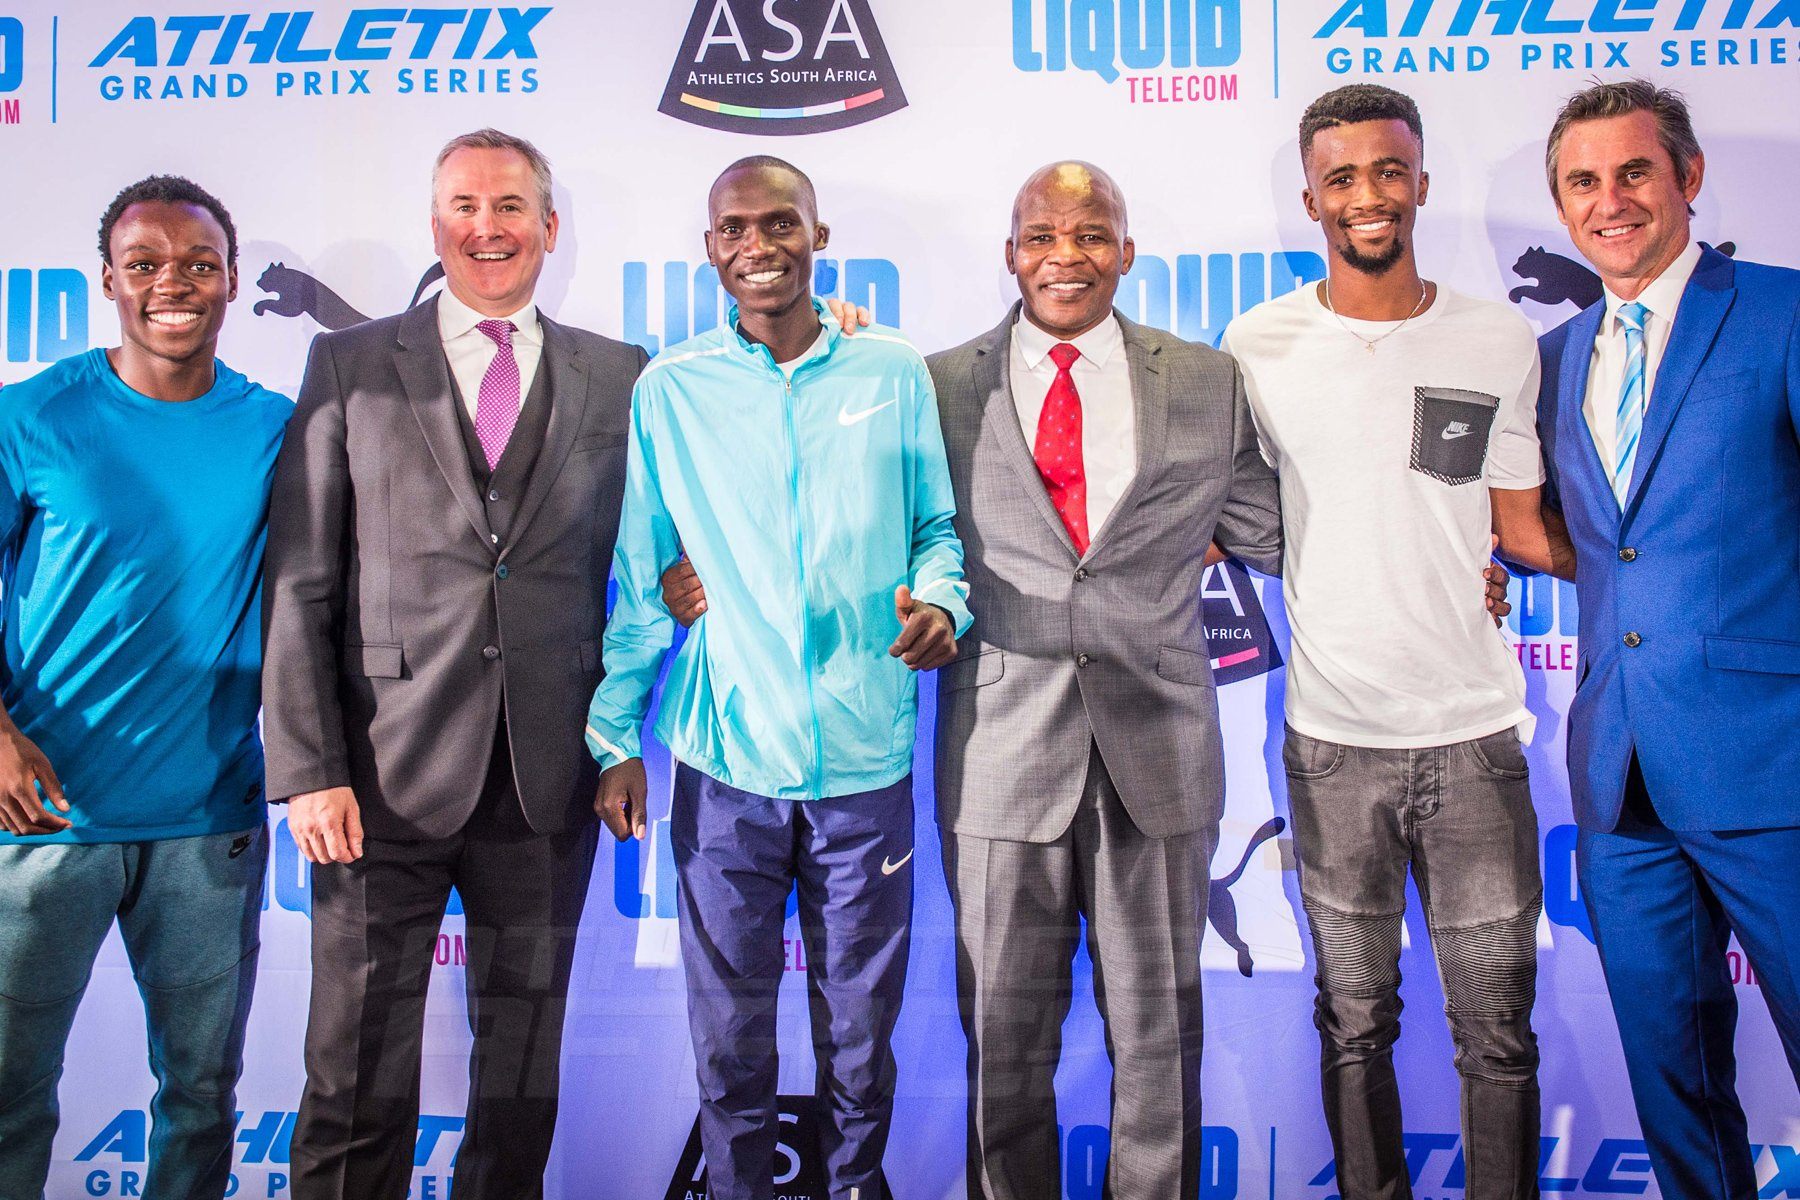 (from left to right): Clarence Munyai, Kyle Whitehall (Liquid Telecom South Africa Chief Executive Officer), Joshua Cheptegei, Aleck Skhosana (the president of Athletics South Africa), Anaso Jobodwana and Michael Meyer (Managing Director of Stillwater Sports). Photo Credit: Tobias Ginsberg